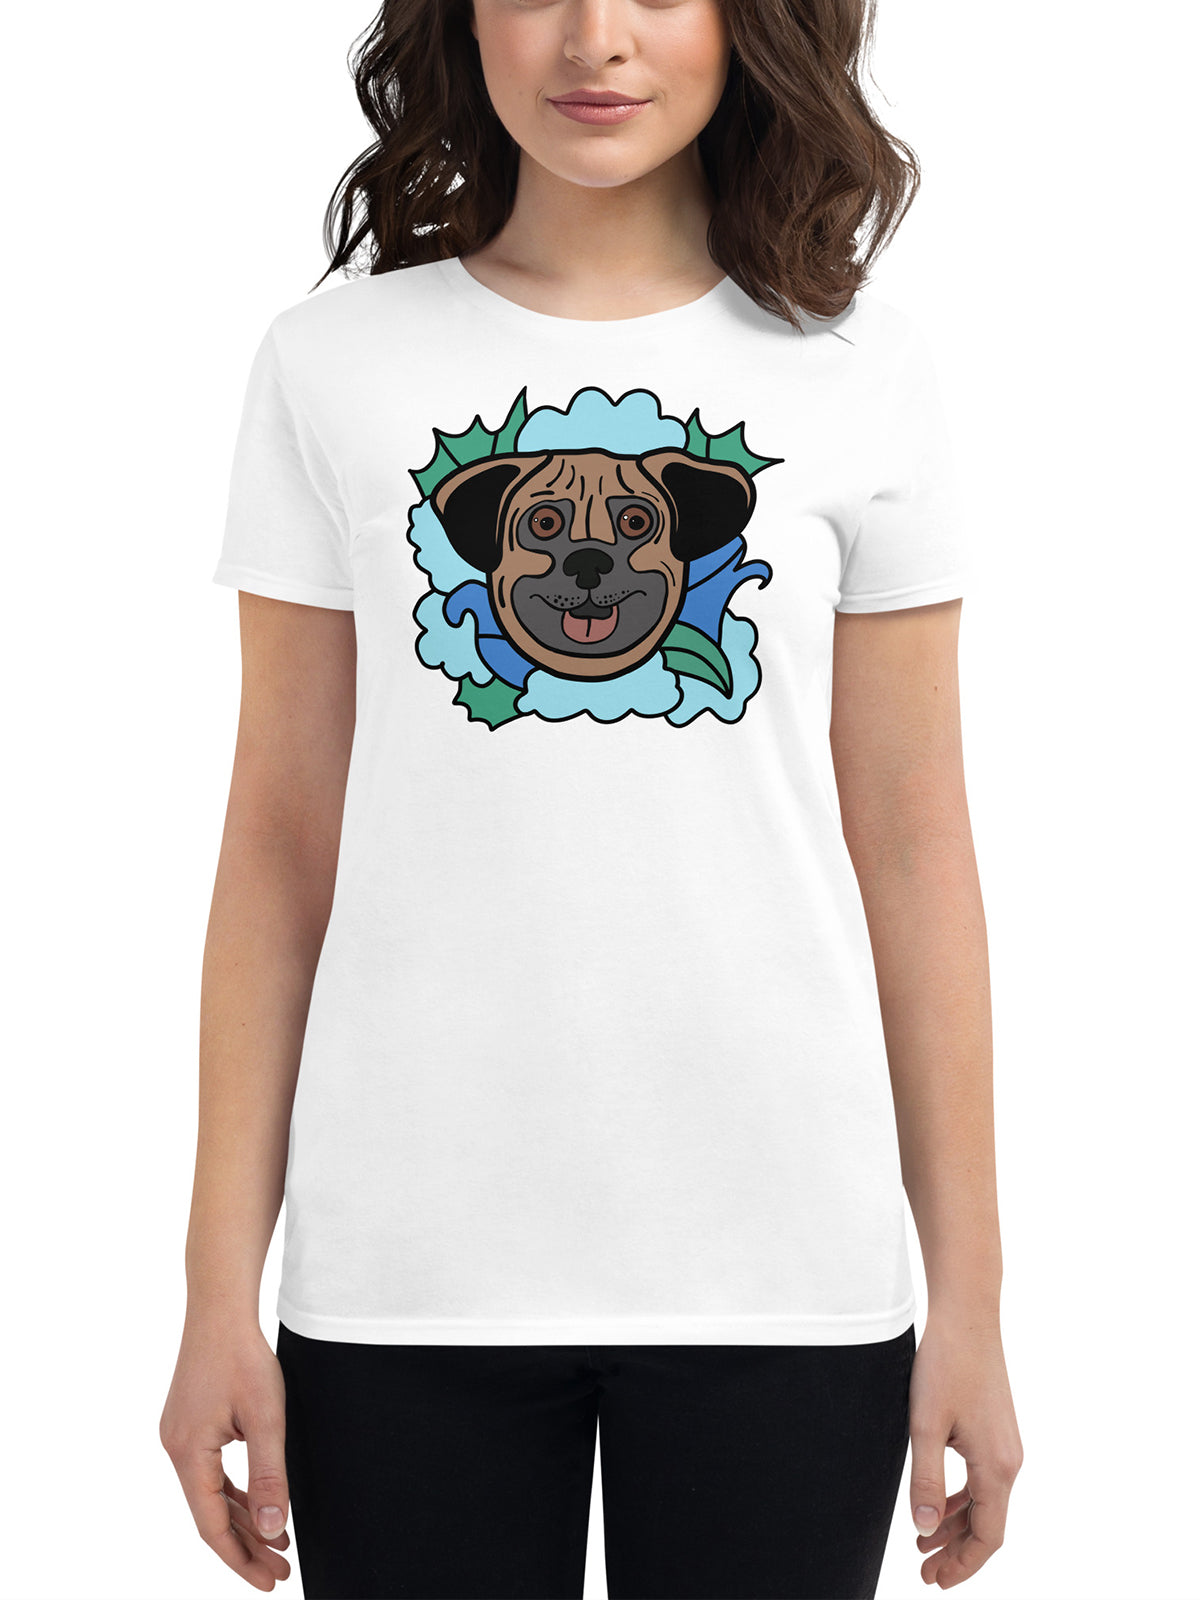 The Puggy T-shirt For Women